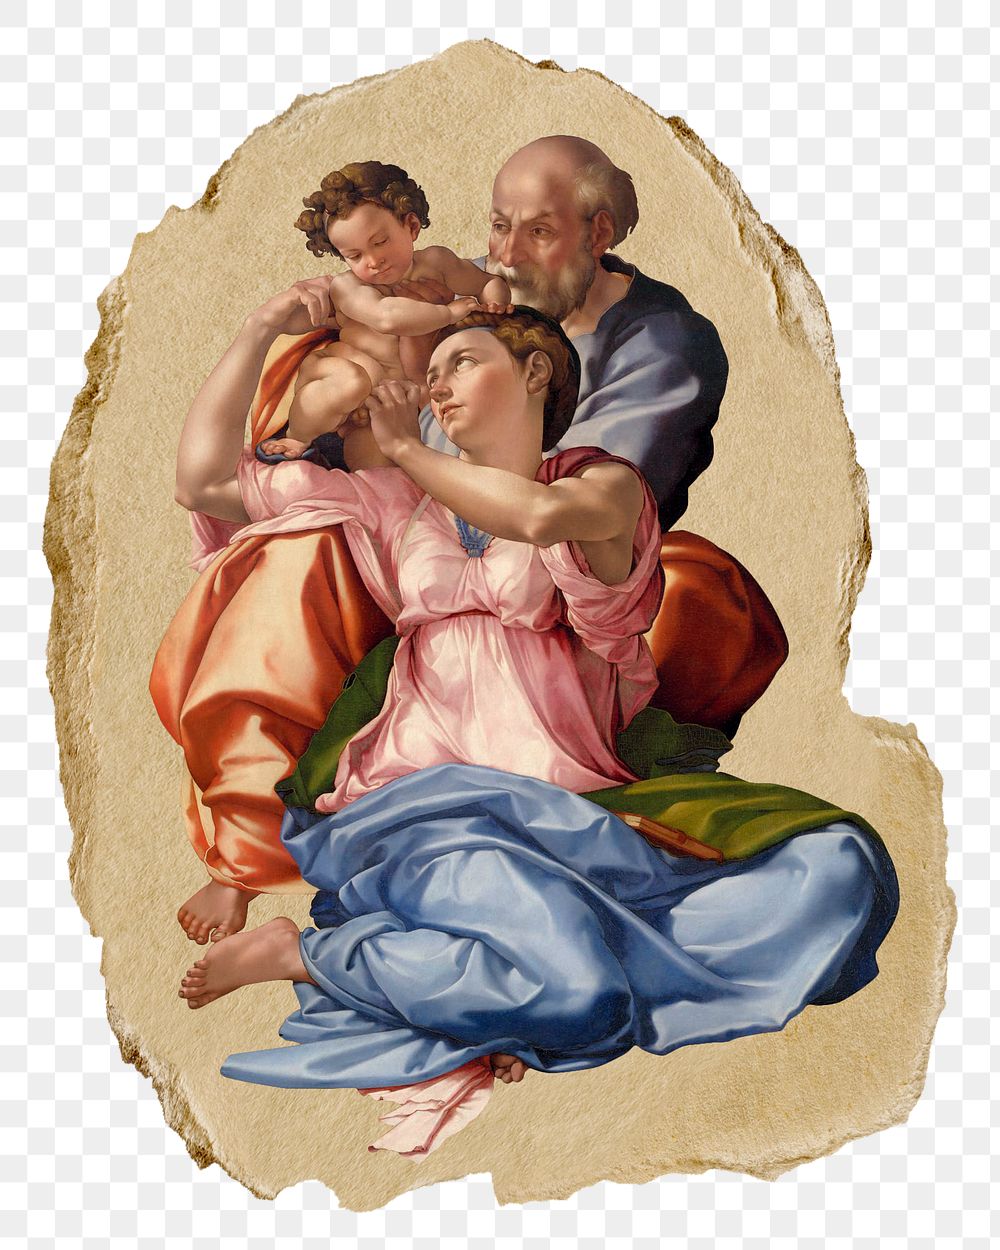 The holy family png sticker, Michelangelo-inspired artwork, transparent background, ripped paper badge, remixed by rawpixel